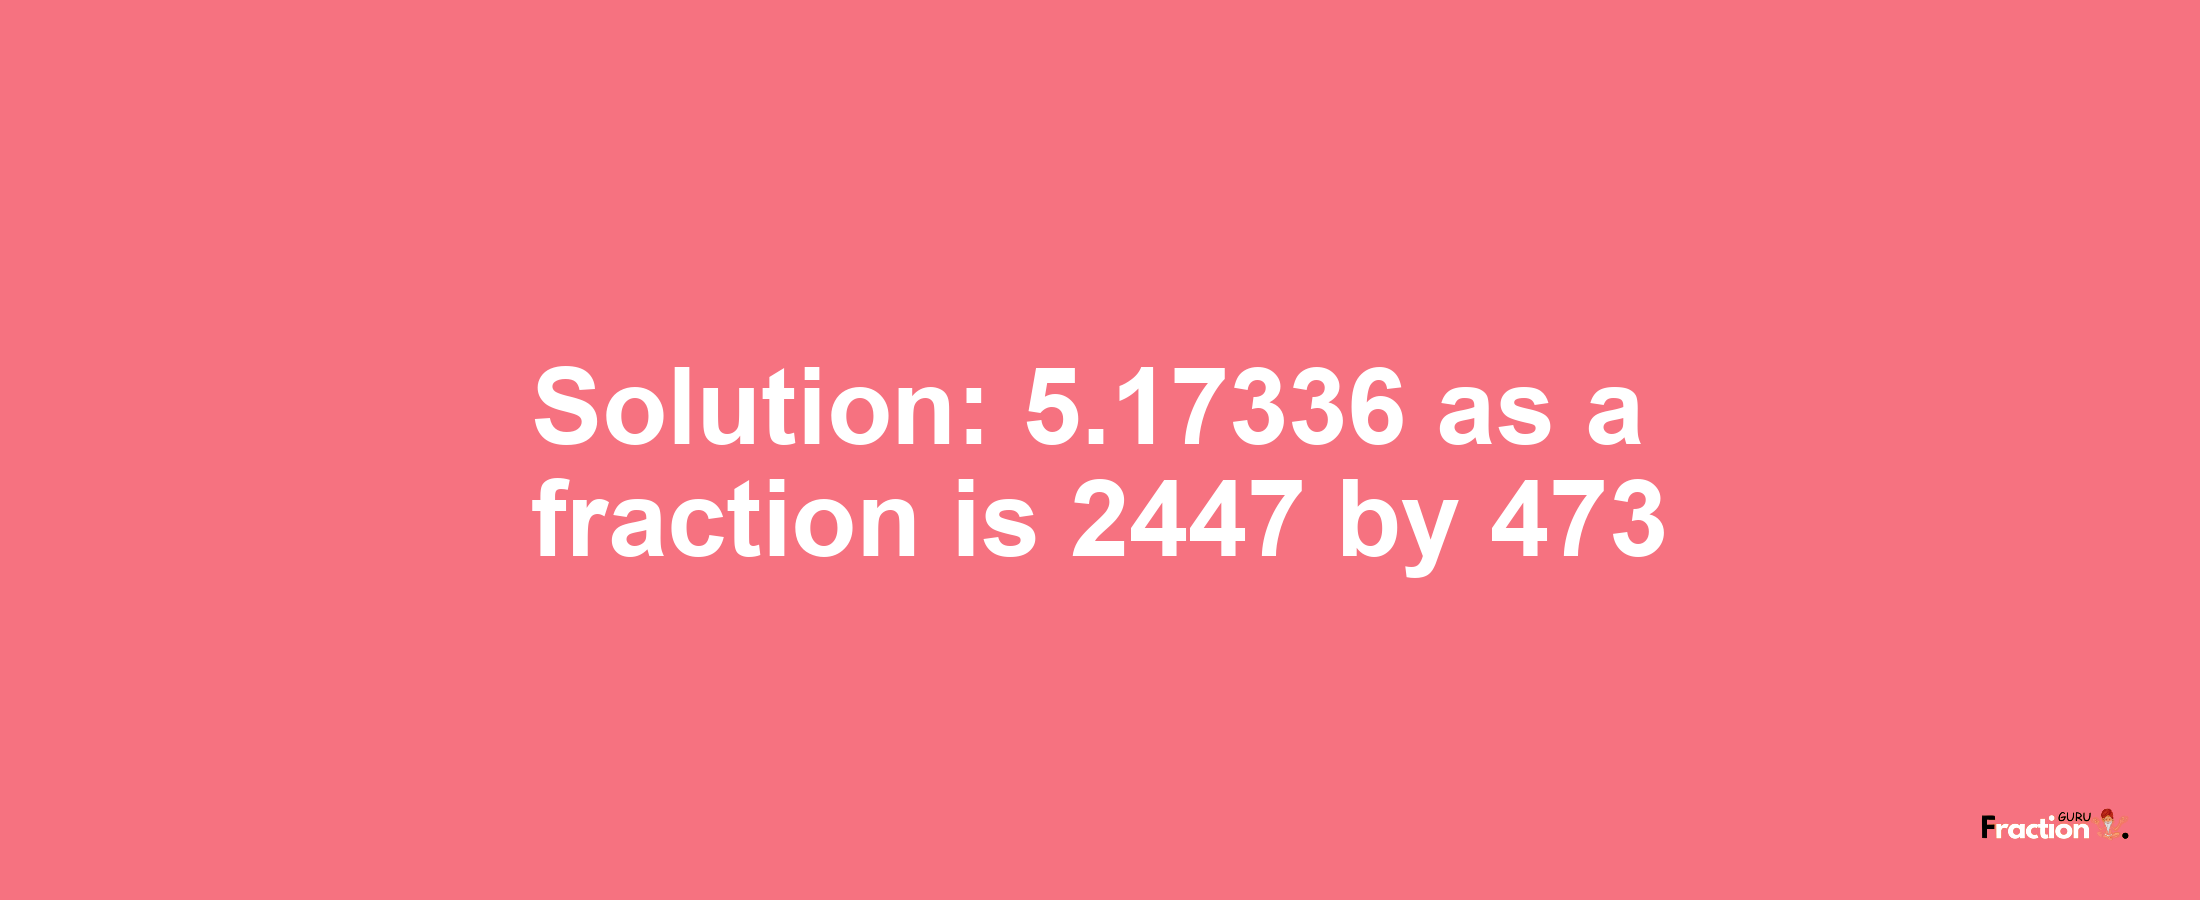 Solution:5.17336 as a fraction is 2447/473